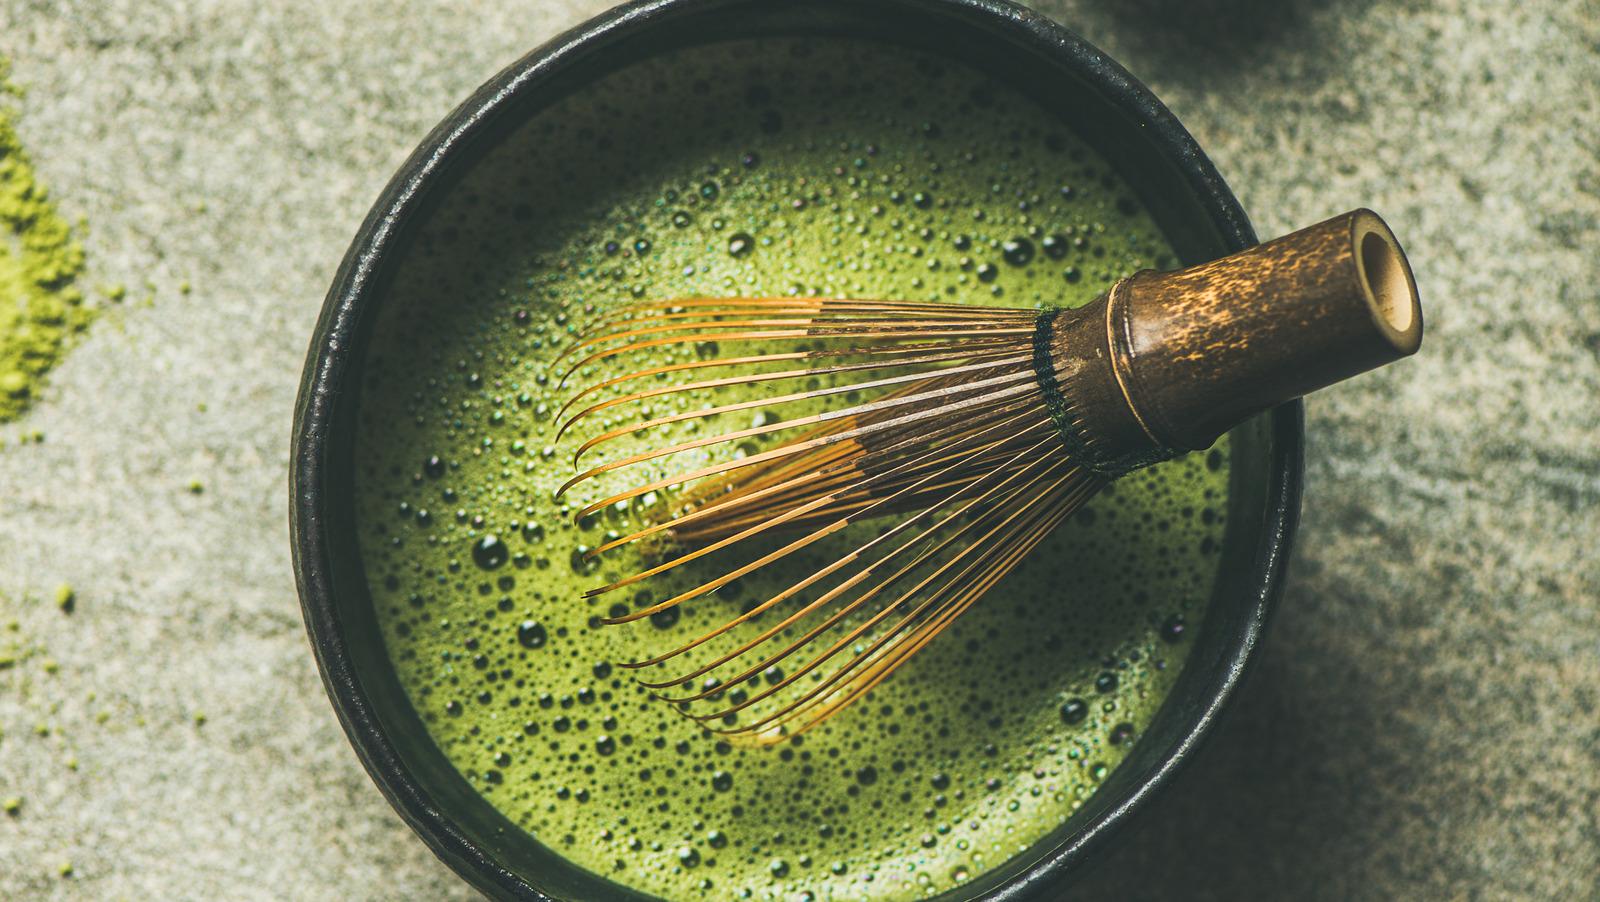 https://www.tastingtable.com/img/gallery/do-you-really-need-a-bamboo-whisk-for-matcha/l-intro-1657726522.jpg